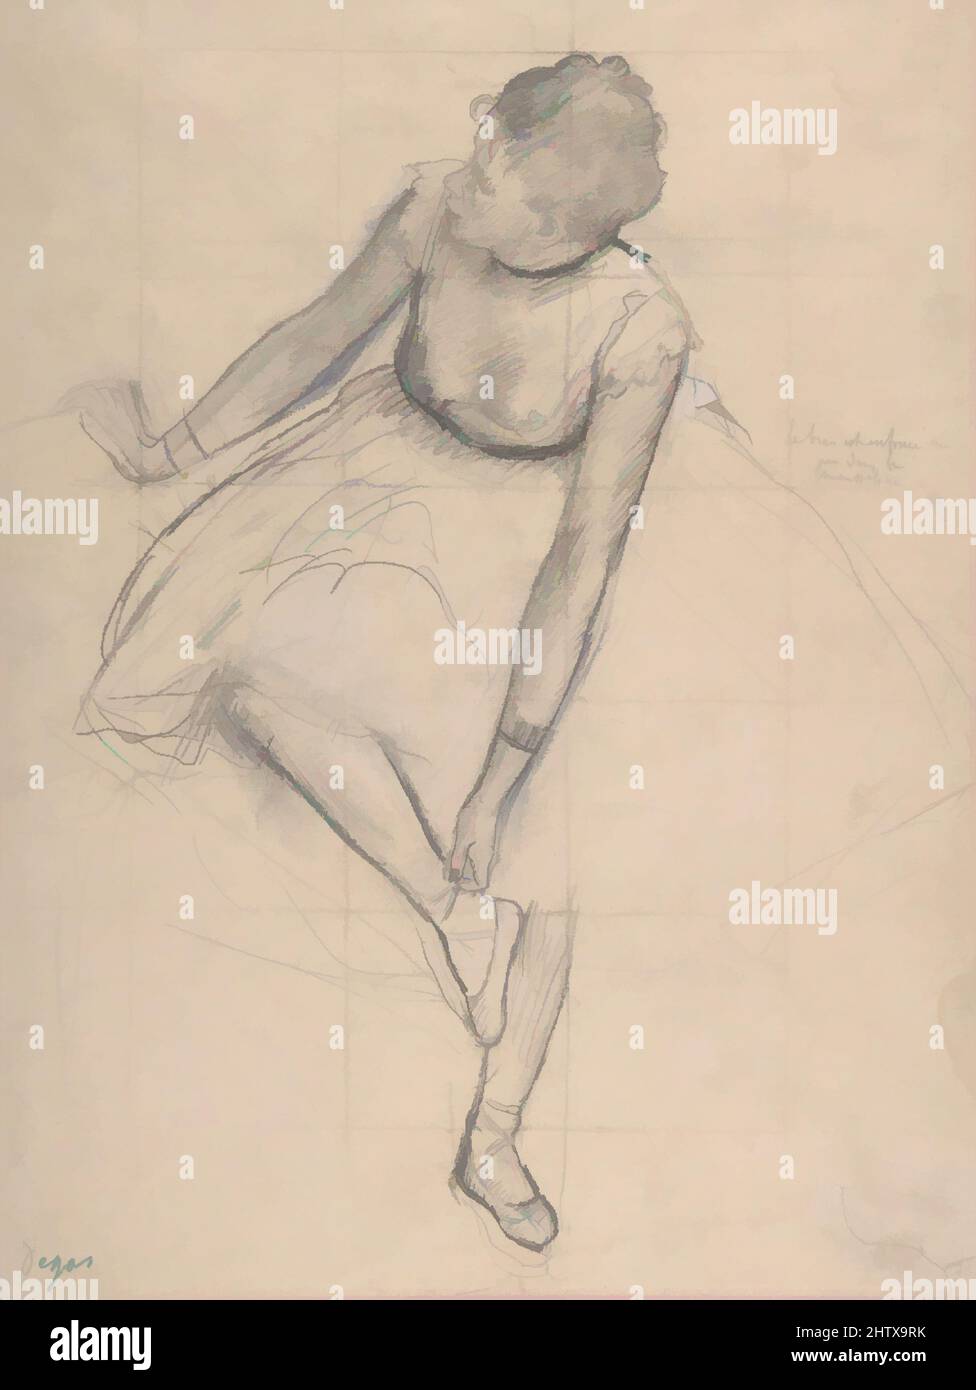 Art inspired by Dancer Adjusting Her Slipper, 1873, Graphite heightened with black and white chalk on pink wove paper (now faded); squared for transfer, Sheet: 13 x 9 5/8 in. (33 x 24.4cm), Drawings, Edgar Degas (French, Paris 1834–1917 Paris), Between 1873 and 1874, Degas made several, Classic works modernized by Artotop with a splash of modernity. Shapes, color and value, eye-catching visual impact on art. Emotions through freedom of artworks in a contemporary way. A timeless message pursuing a wildly creative new direction. Artists turning to the digital medium and creating the Artotop NFT Stock Photo